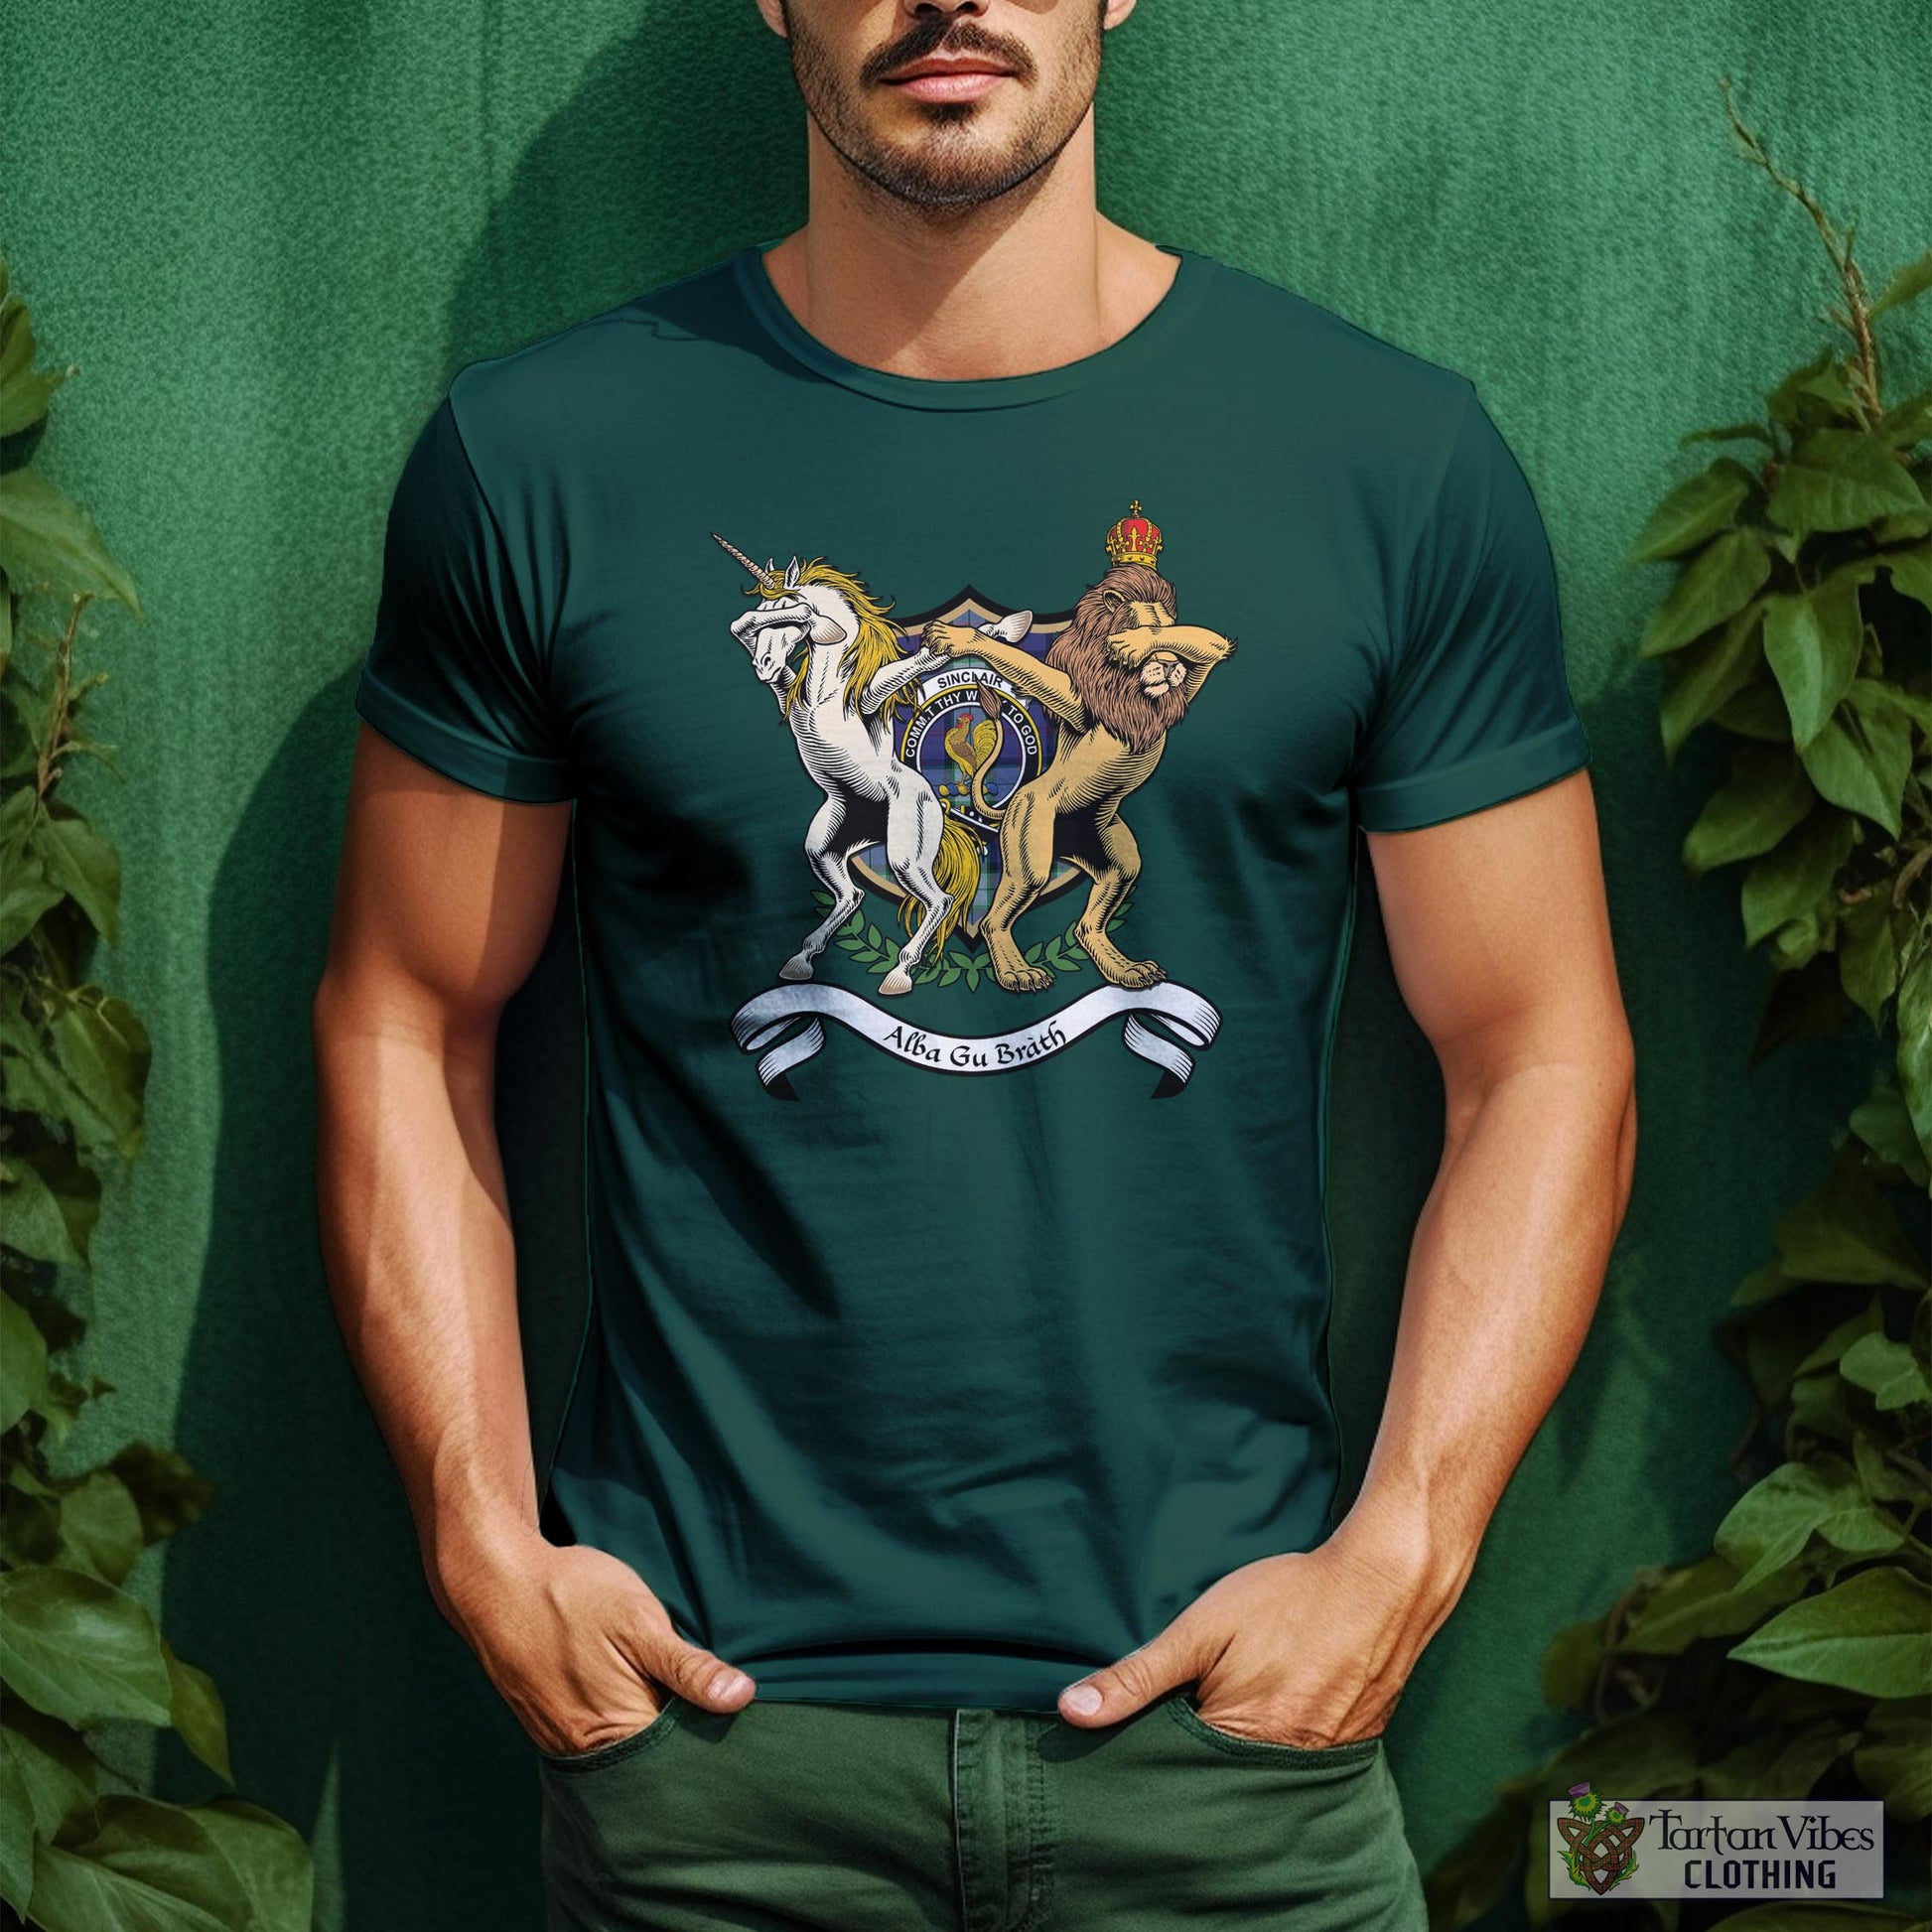 Tartan Vibes Clothing Sinclair Dress Family Crest Cotton Men's T-Shirt with Scotland Royal Coat Of Arm Funny Style